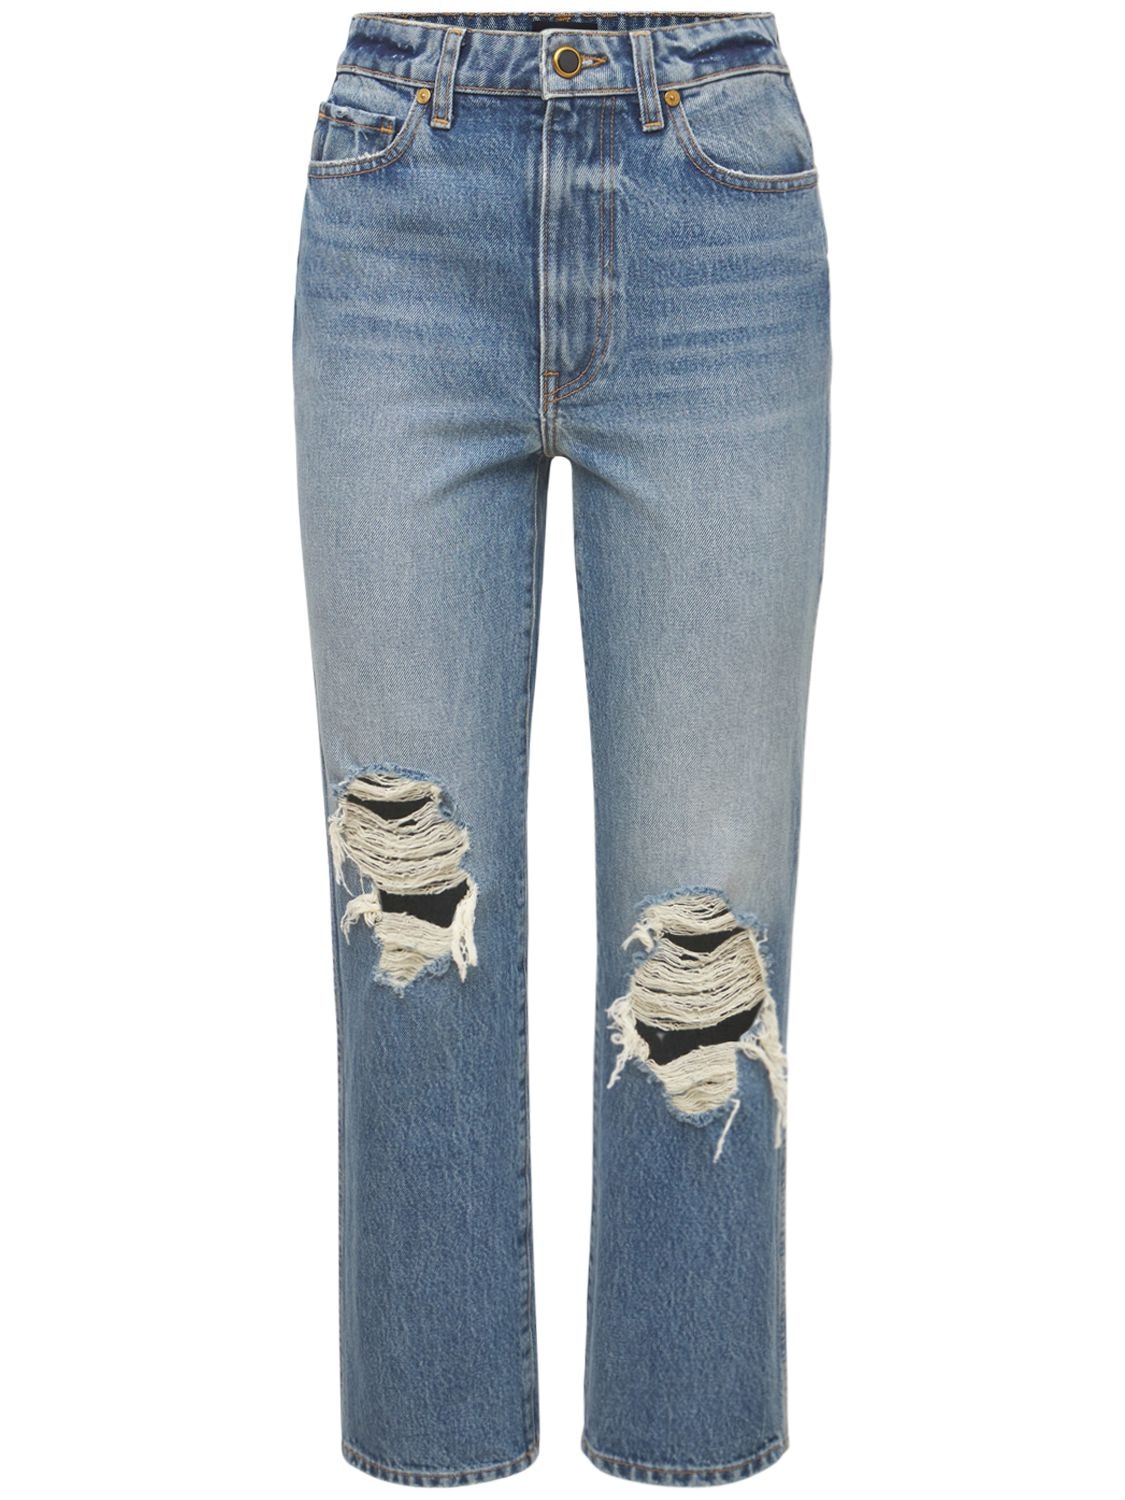 Danielle High Waist Stovepipe Jeans